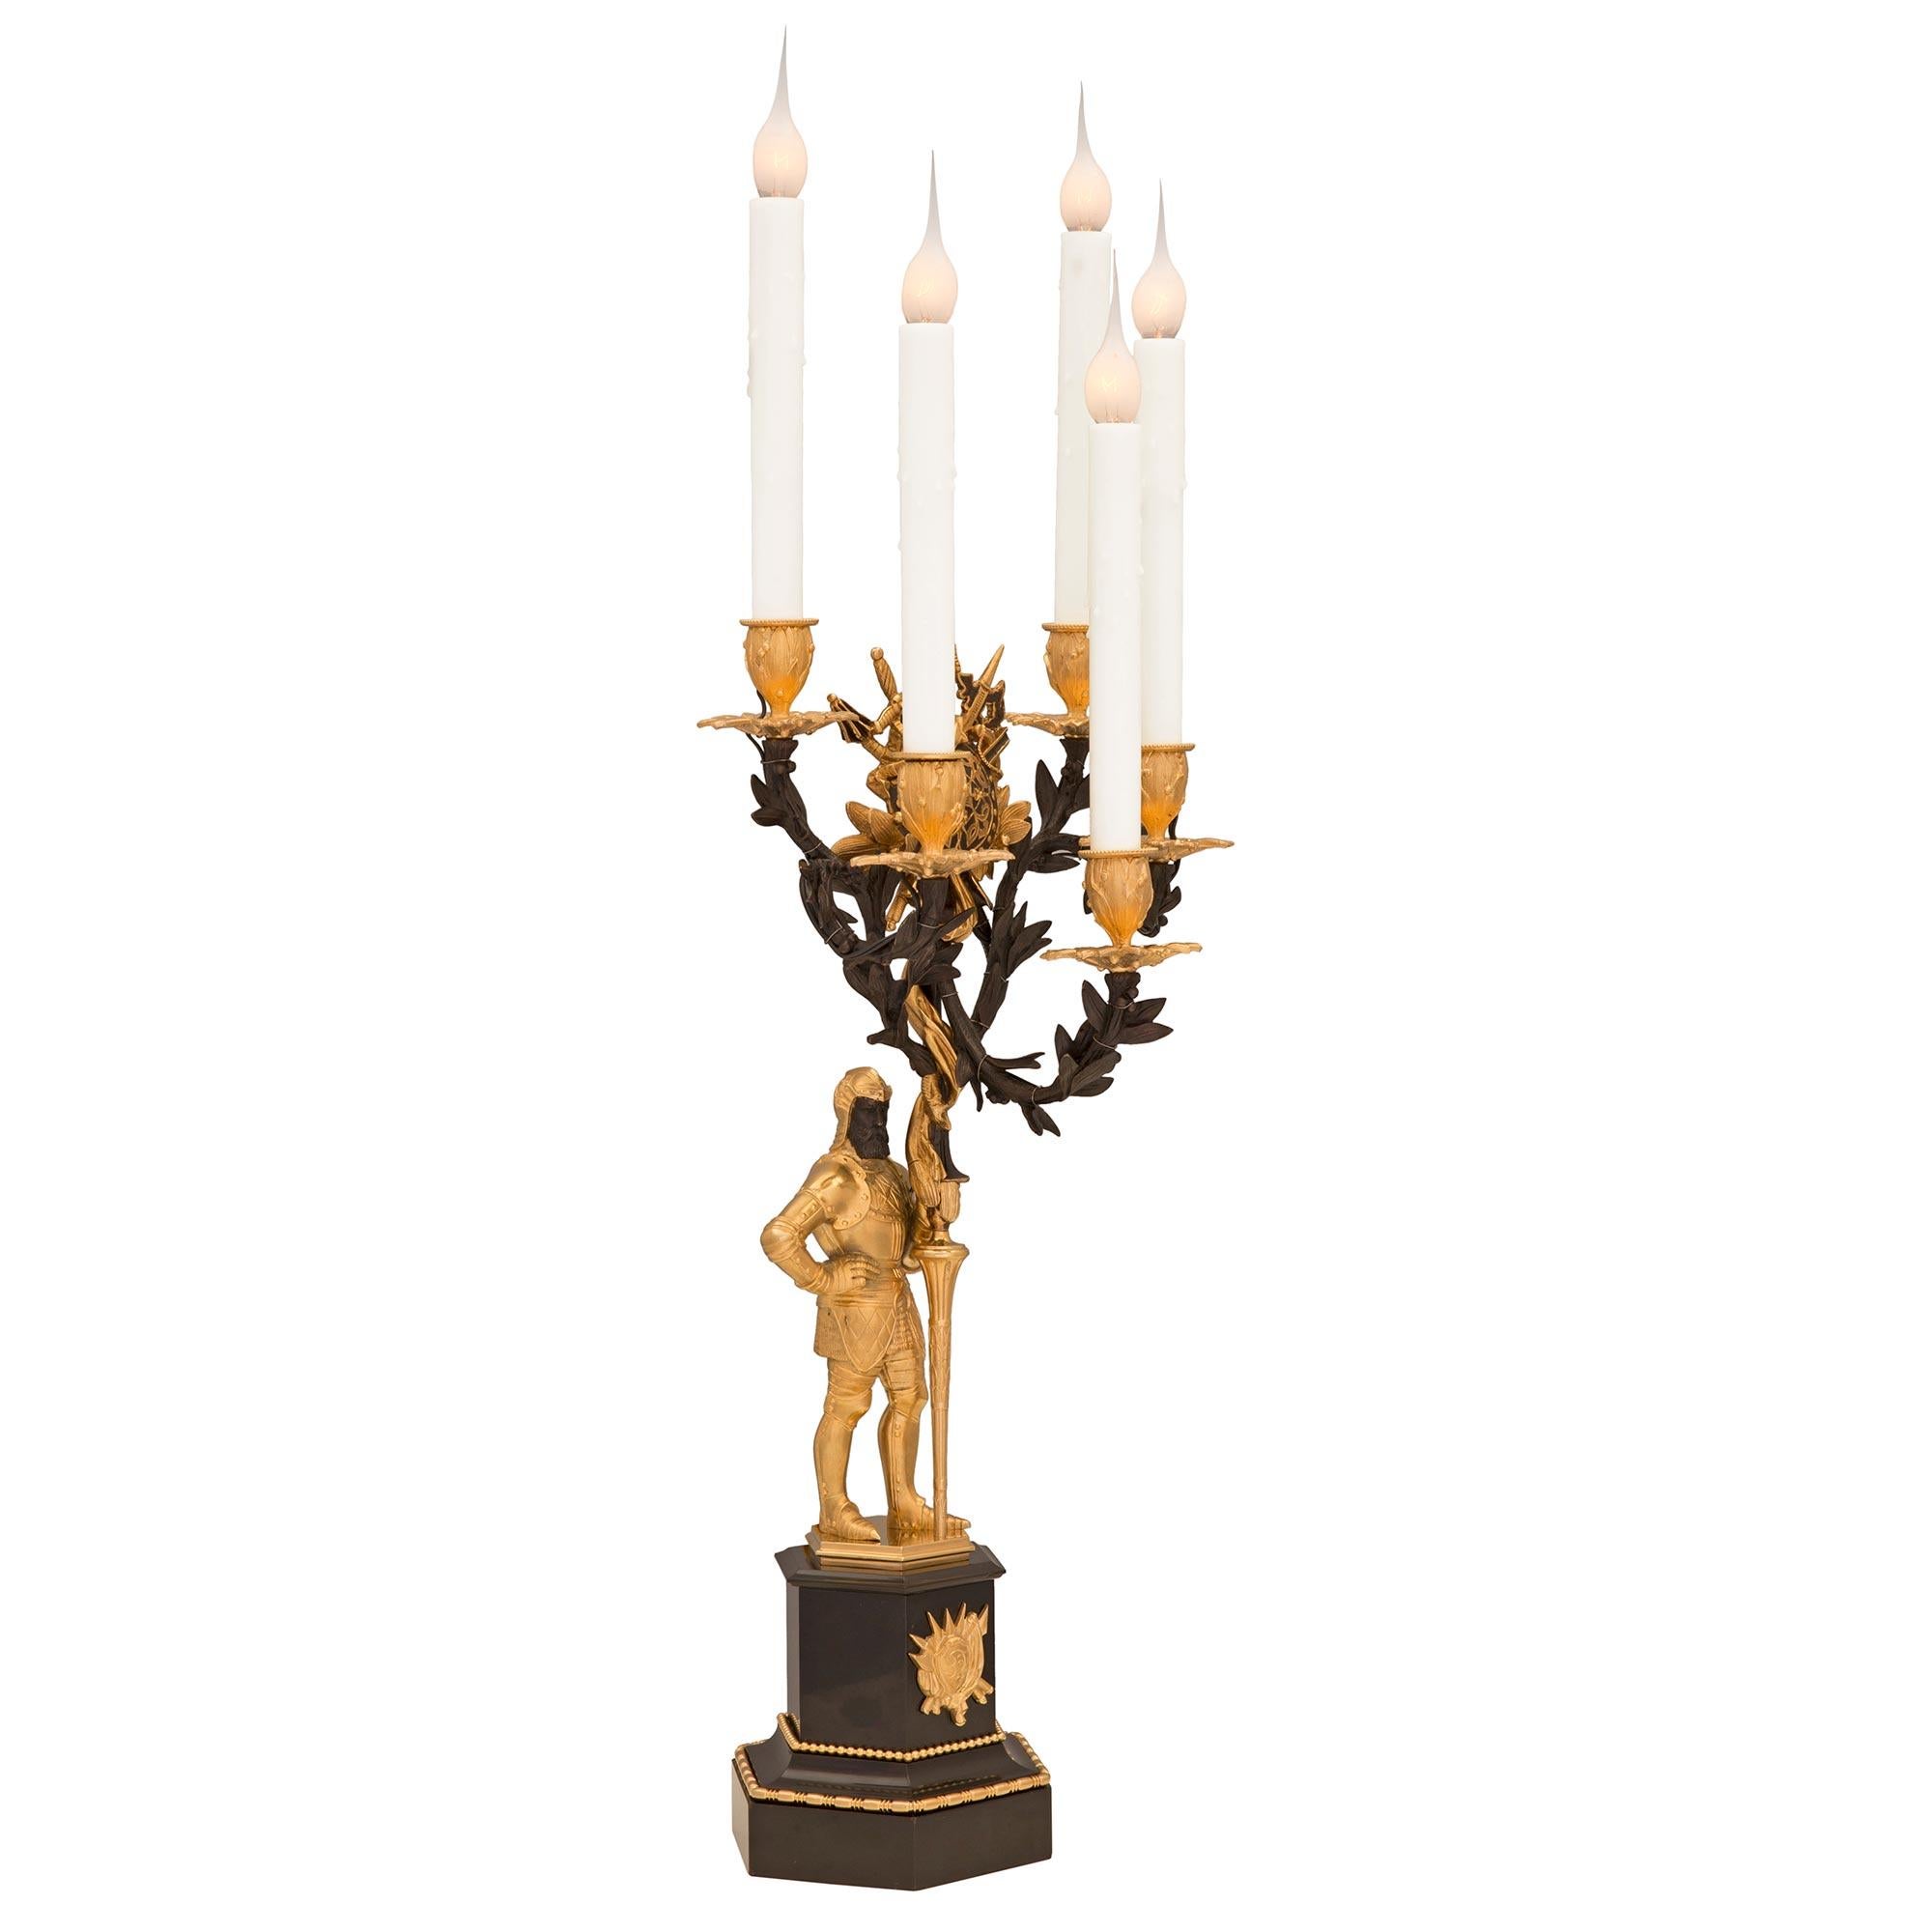 An impressive and high quality true pair of French 19th century Restauration st. patinated bronze, ormolu, and black Belgian marble candelabra lamps. Each five arm lamp is raised by a most decorative hexagonal black Belgian marble base with a fine